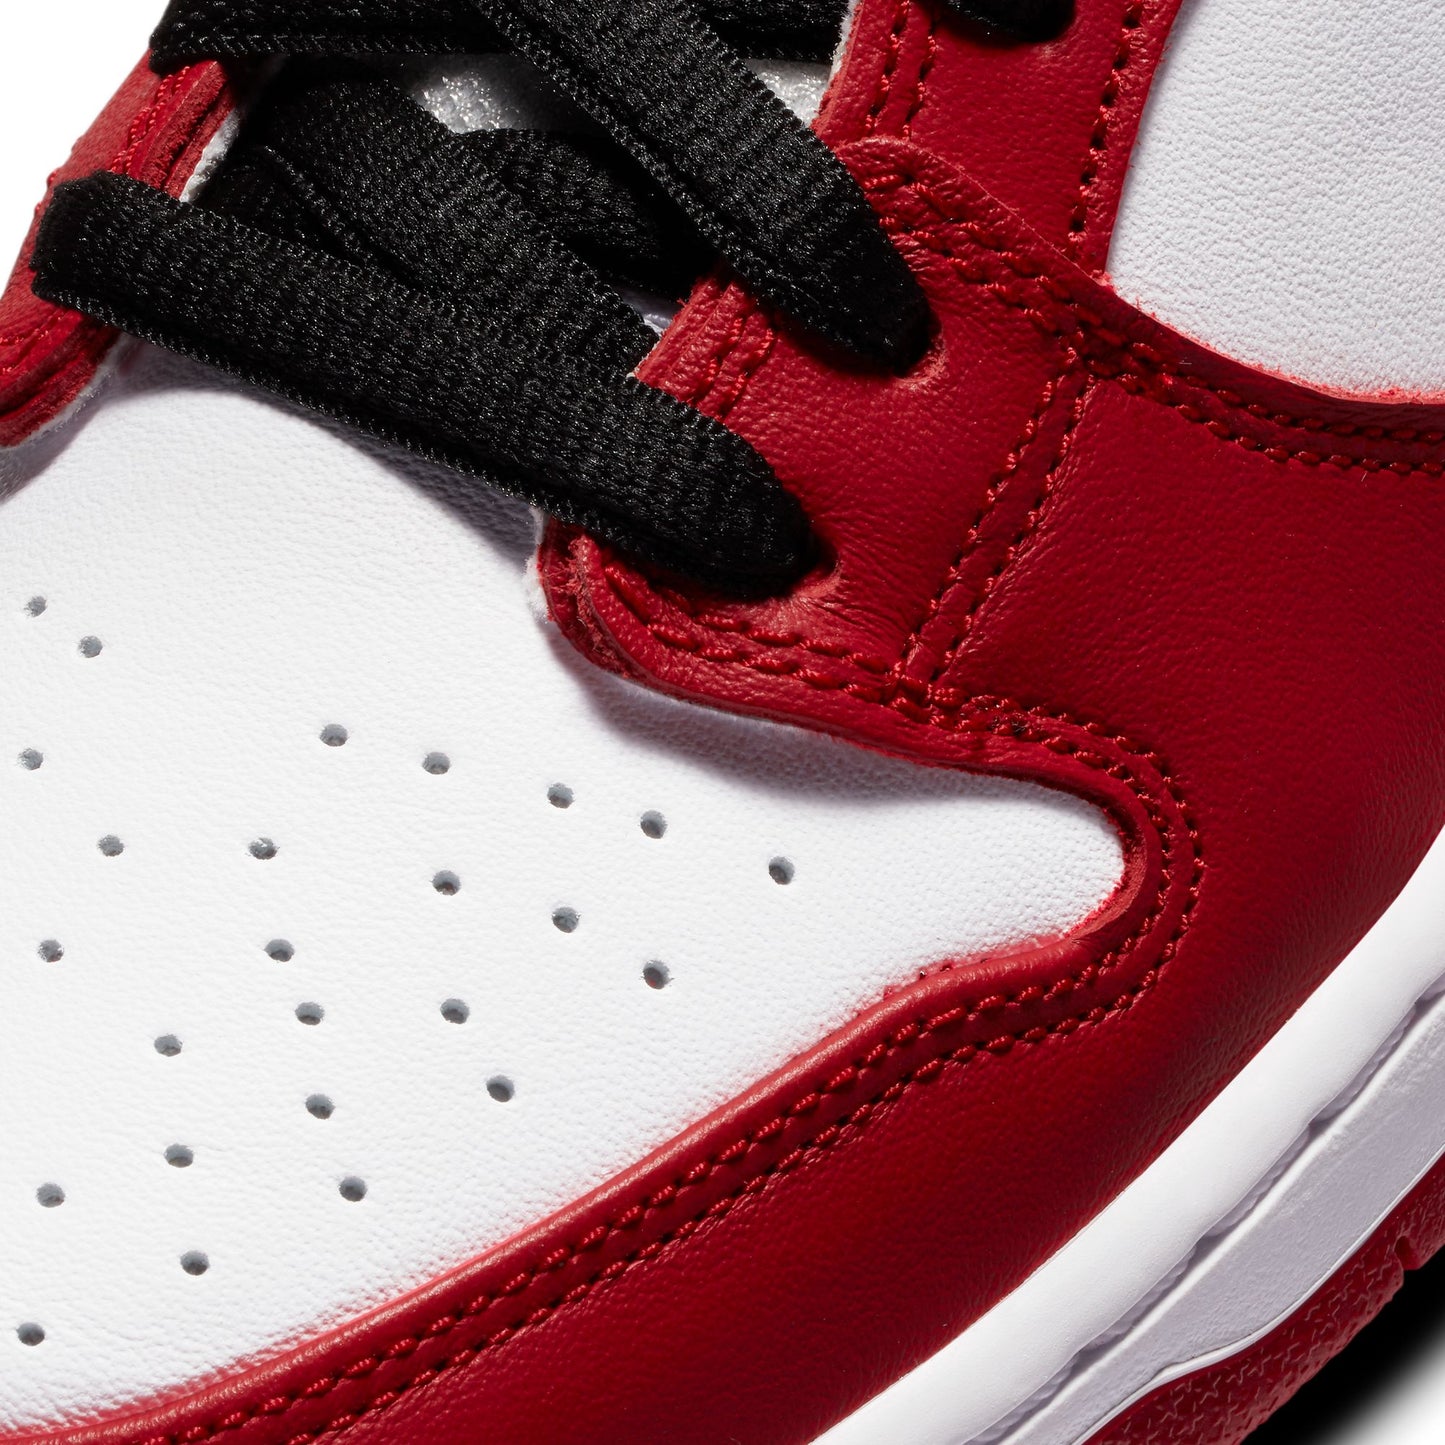 Dunk Low Pro "Chicago J-Pack"